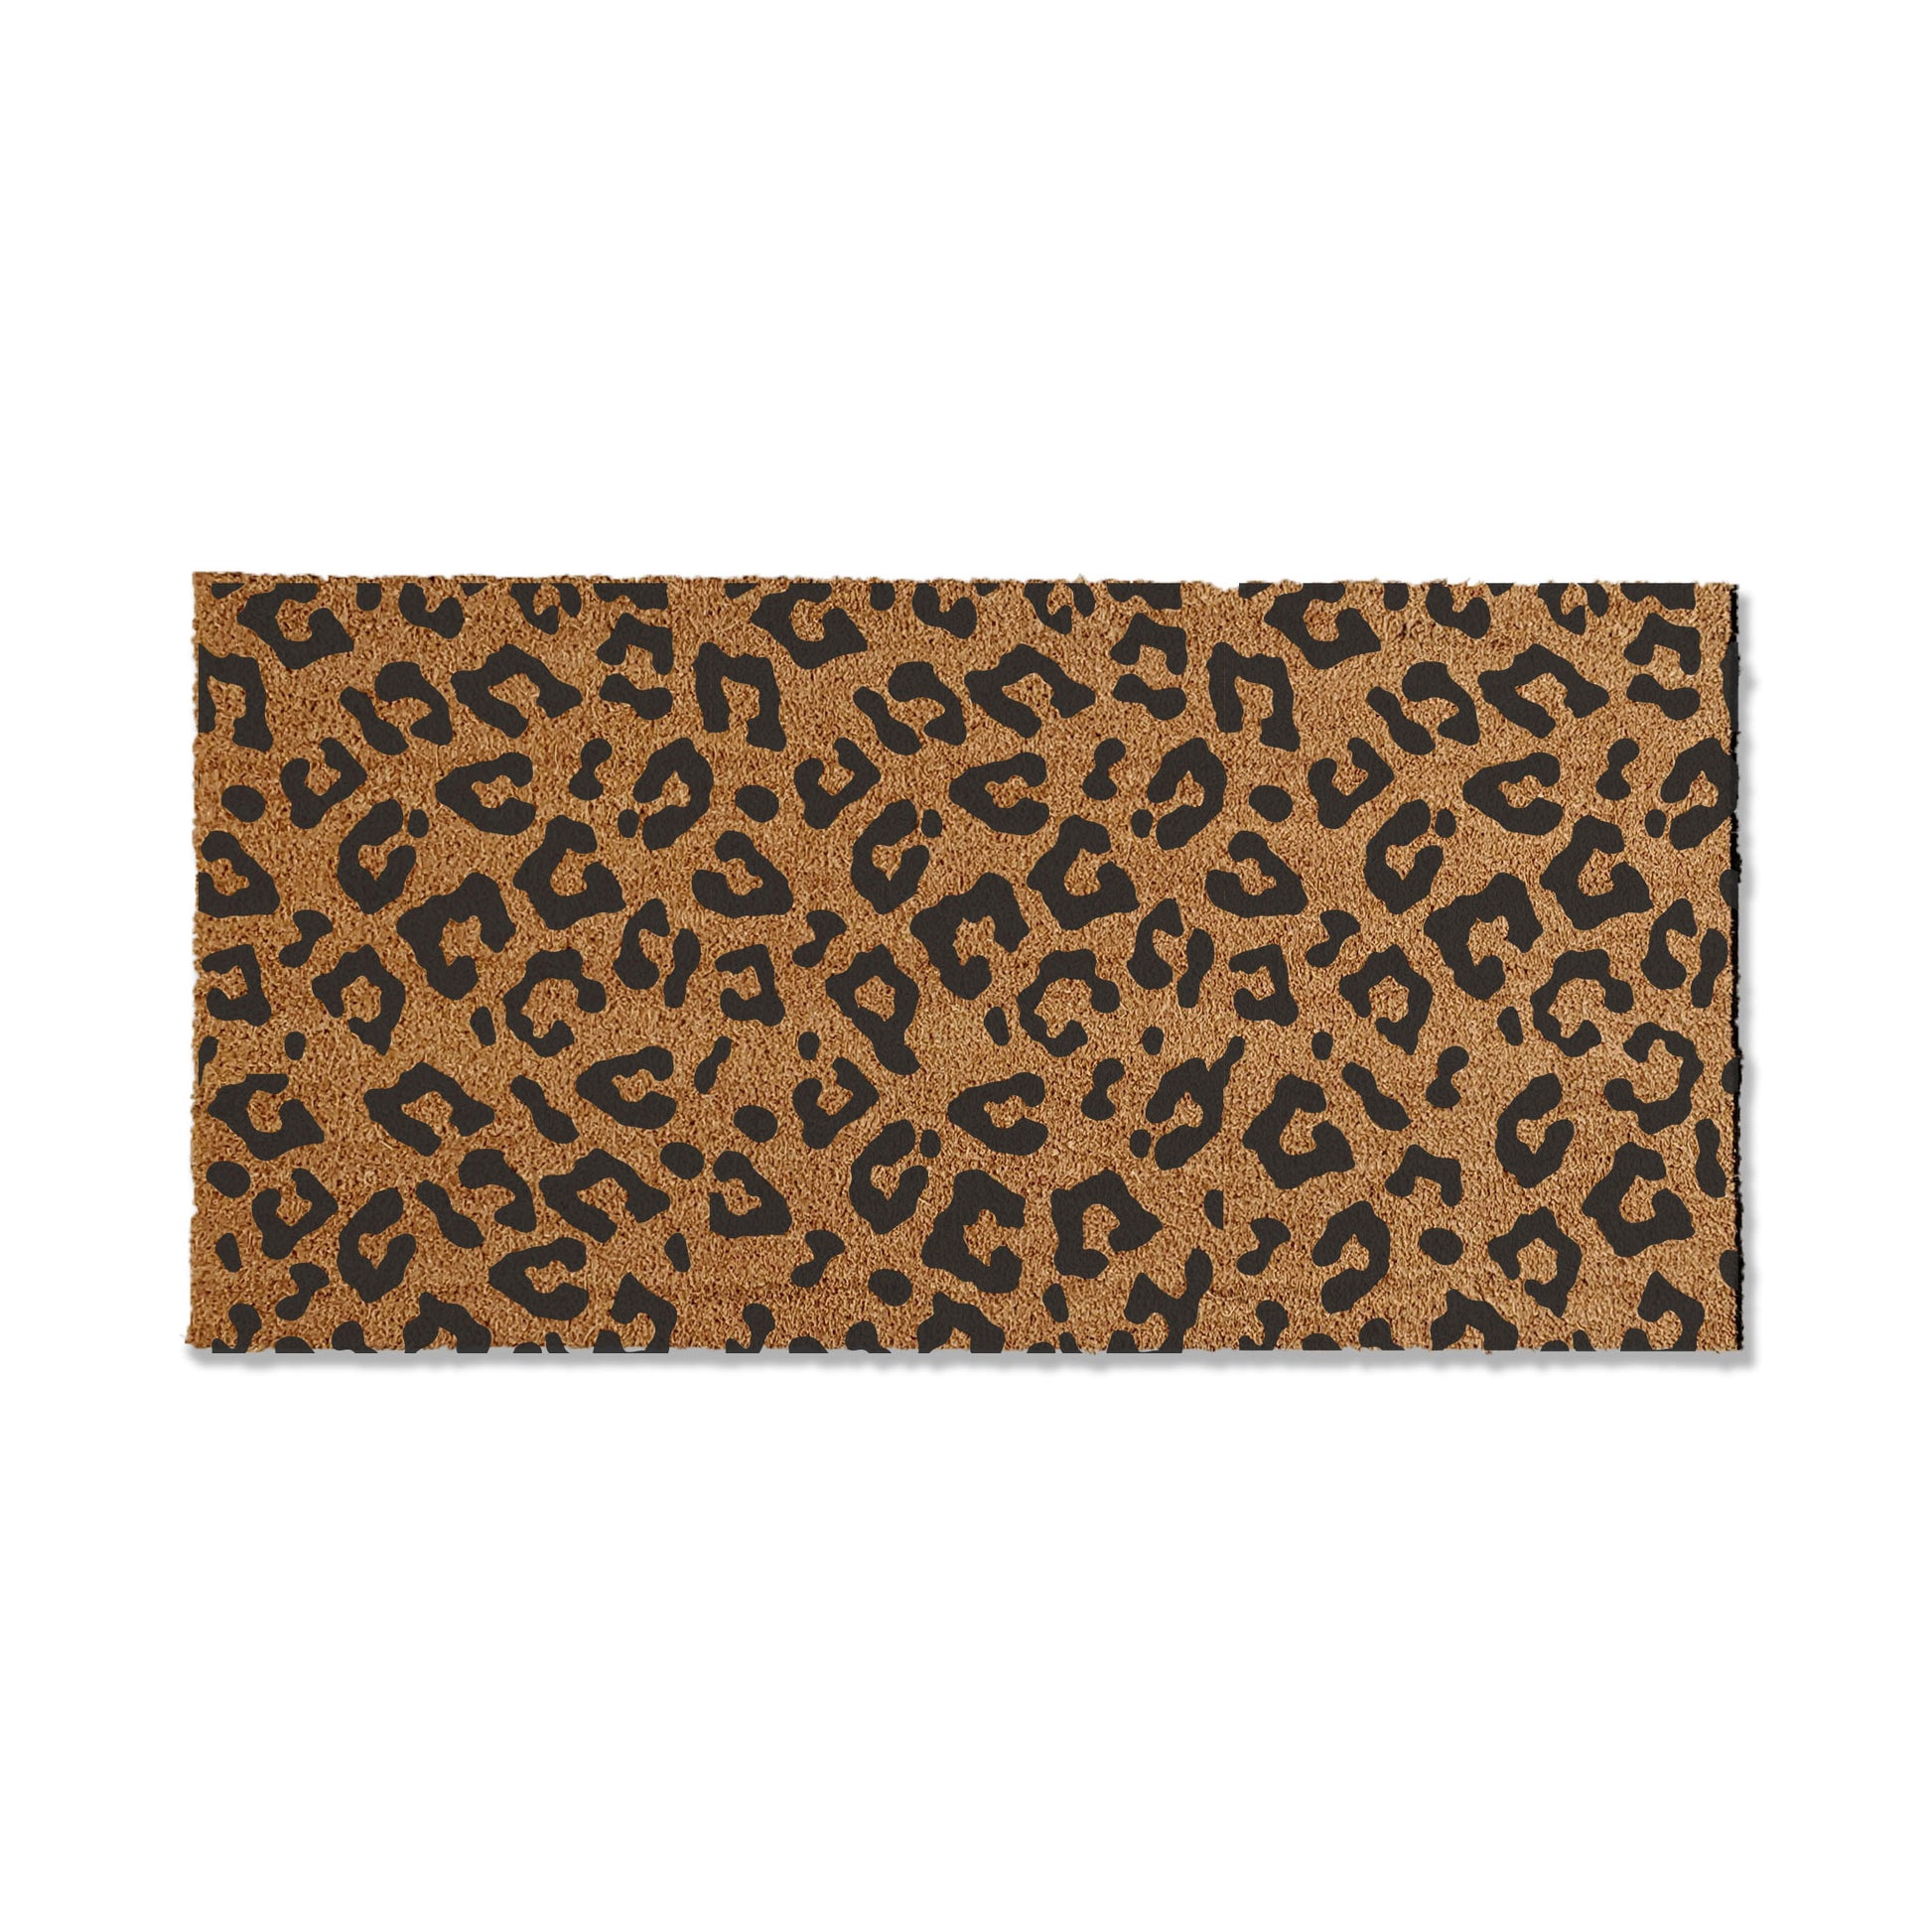 Make a stylish statement with our coir doormat showcasing an all-over leopard print pattern. Perfect for animal print lovers, this trendy design is highly popular. Available in multiple sizes, the mat not only adds a fashionable touch to your doorstep but is also effective at trapping dirt.